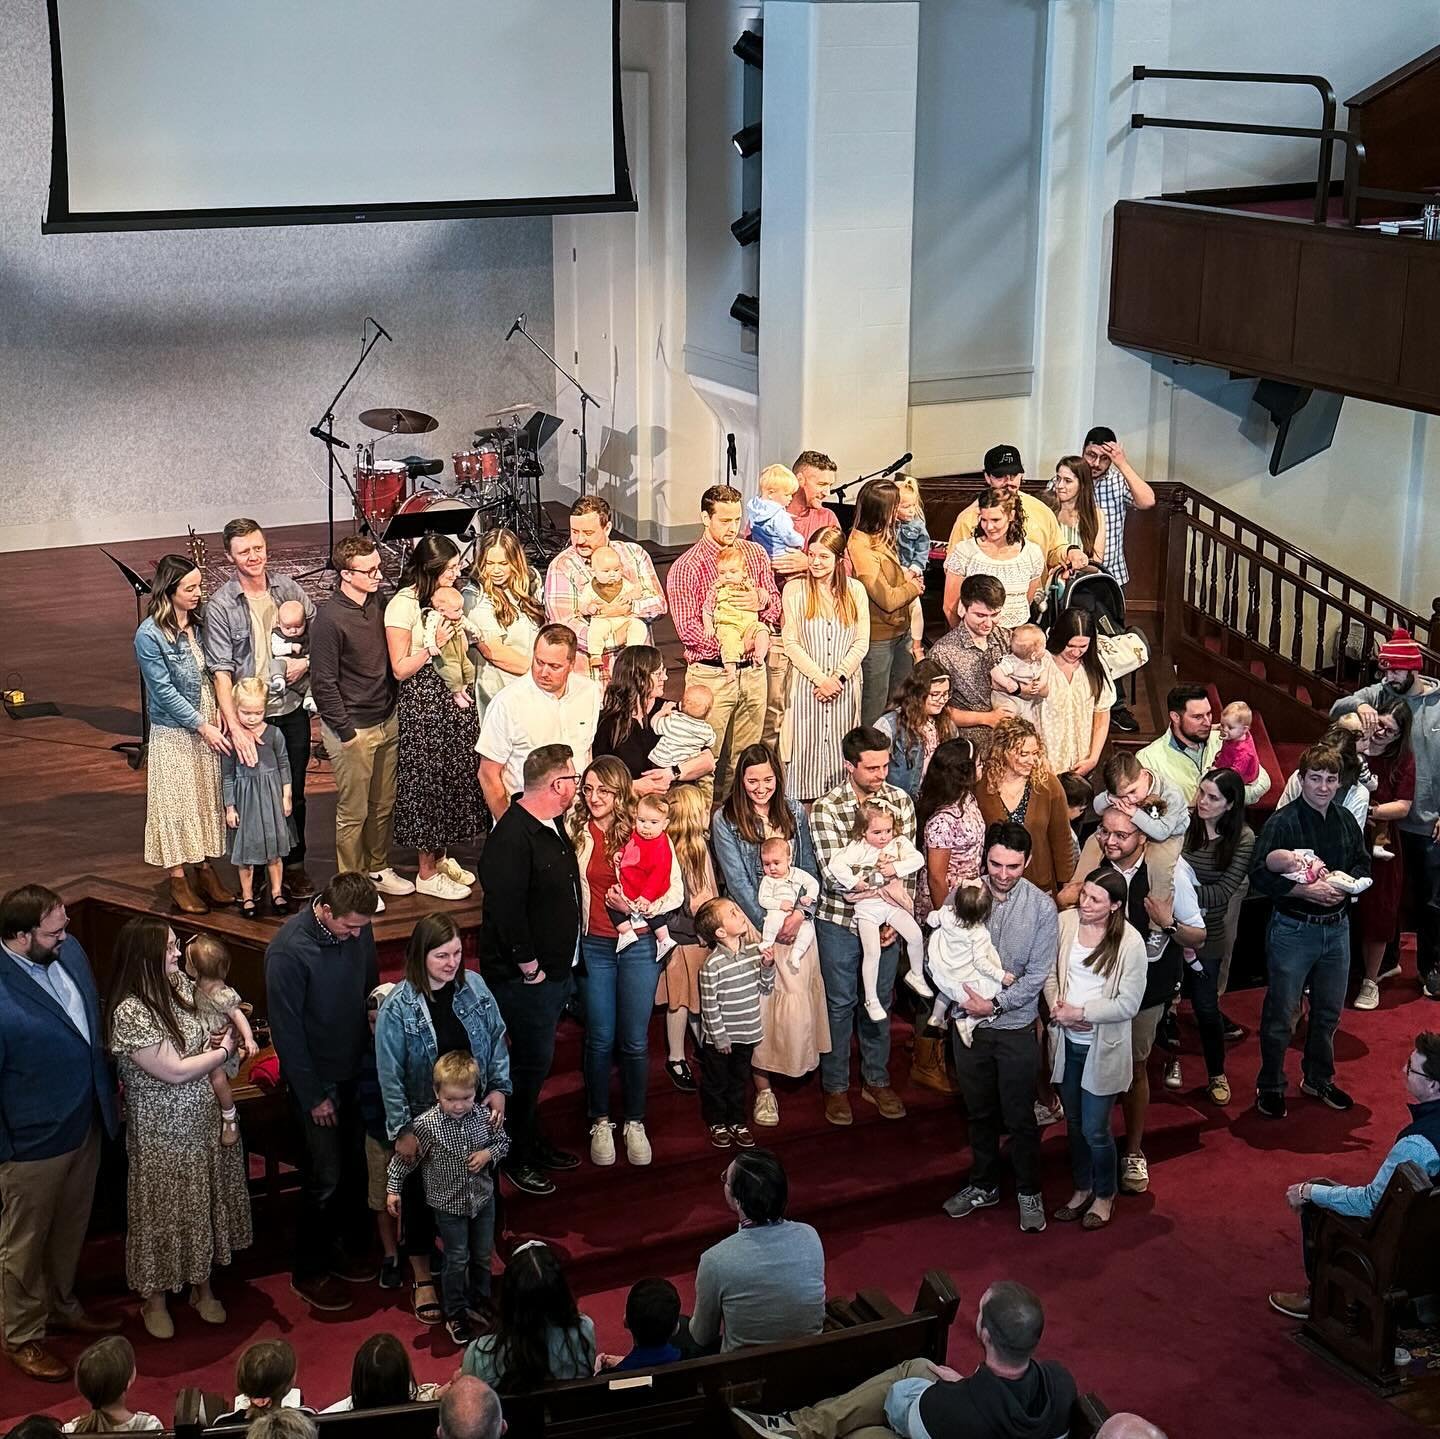 What a joy it was to pray with, and for, these parents this past Sunday as they dedicated their children to the Lord, and committed to raise them in his knowledge and love.

May we, as the church, also commit to come alongside these families in partn